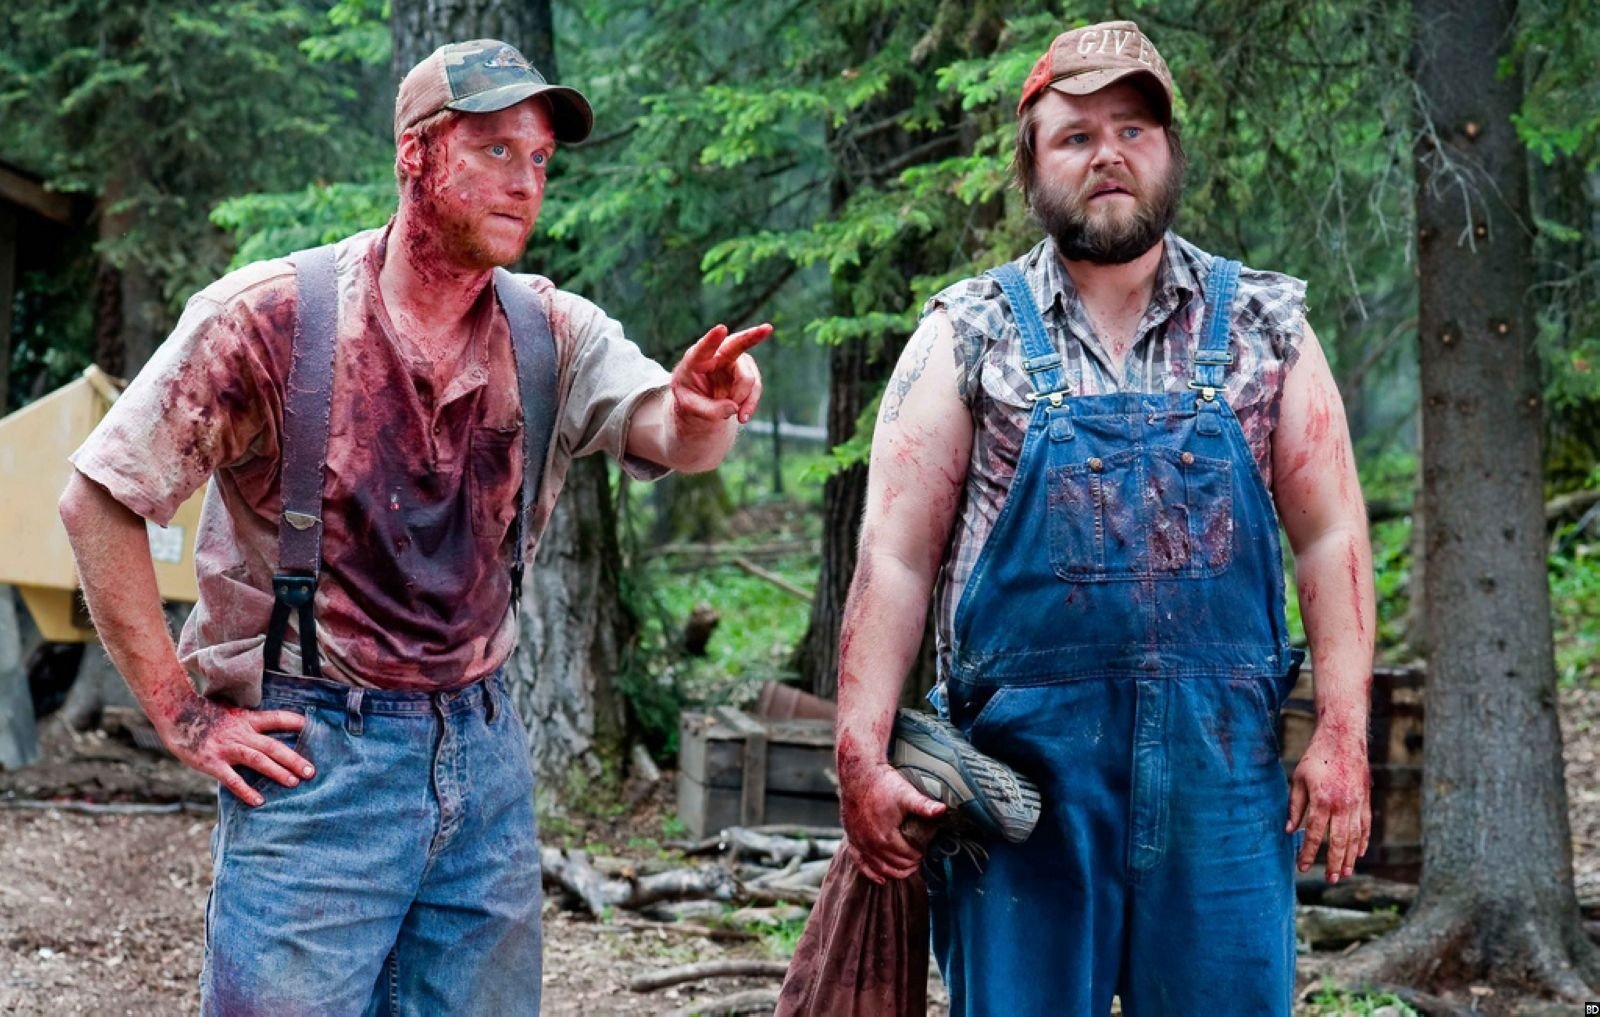 Hillbillies Tucker (Alan Tudyk) and Dale (Tyler Labine) attempt to explain why they are bloodied and holding a severed leg in ‘Tucker & Dale vs. Evil.’